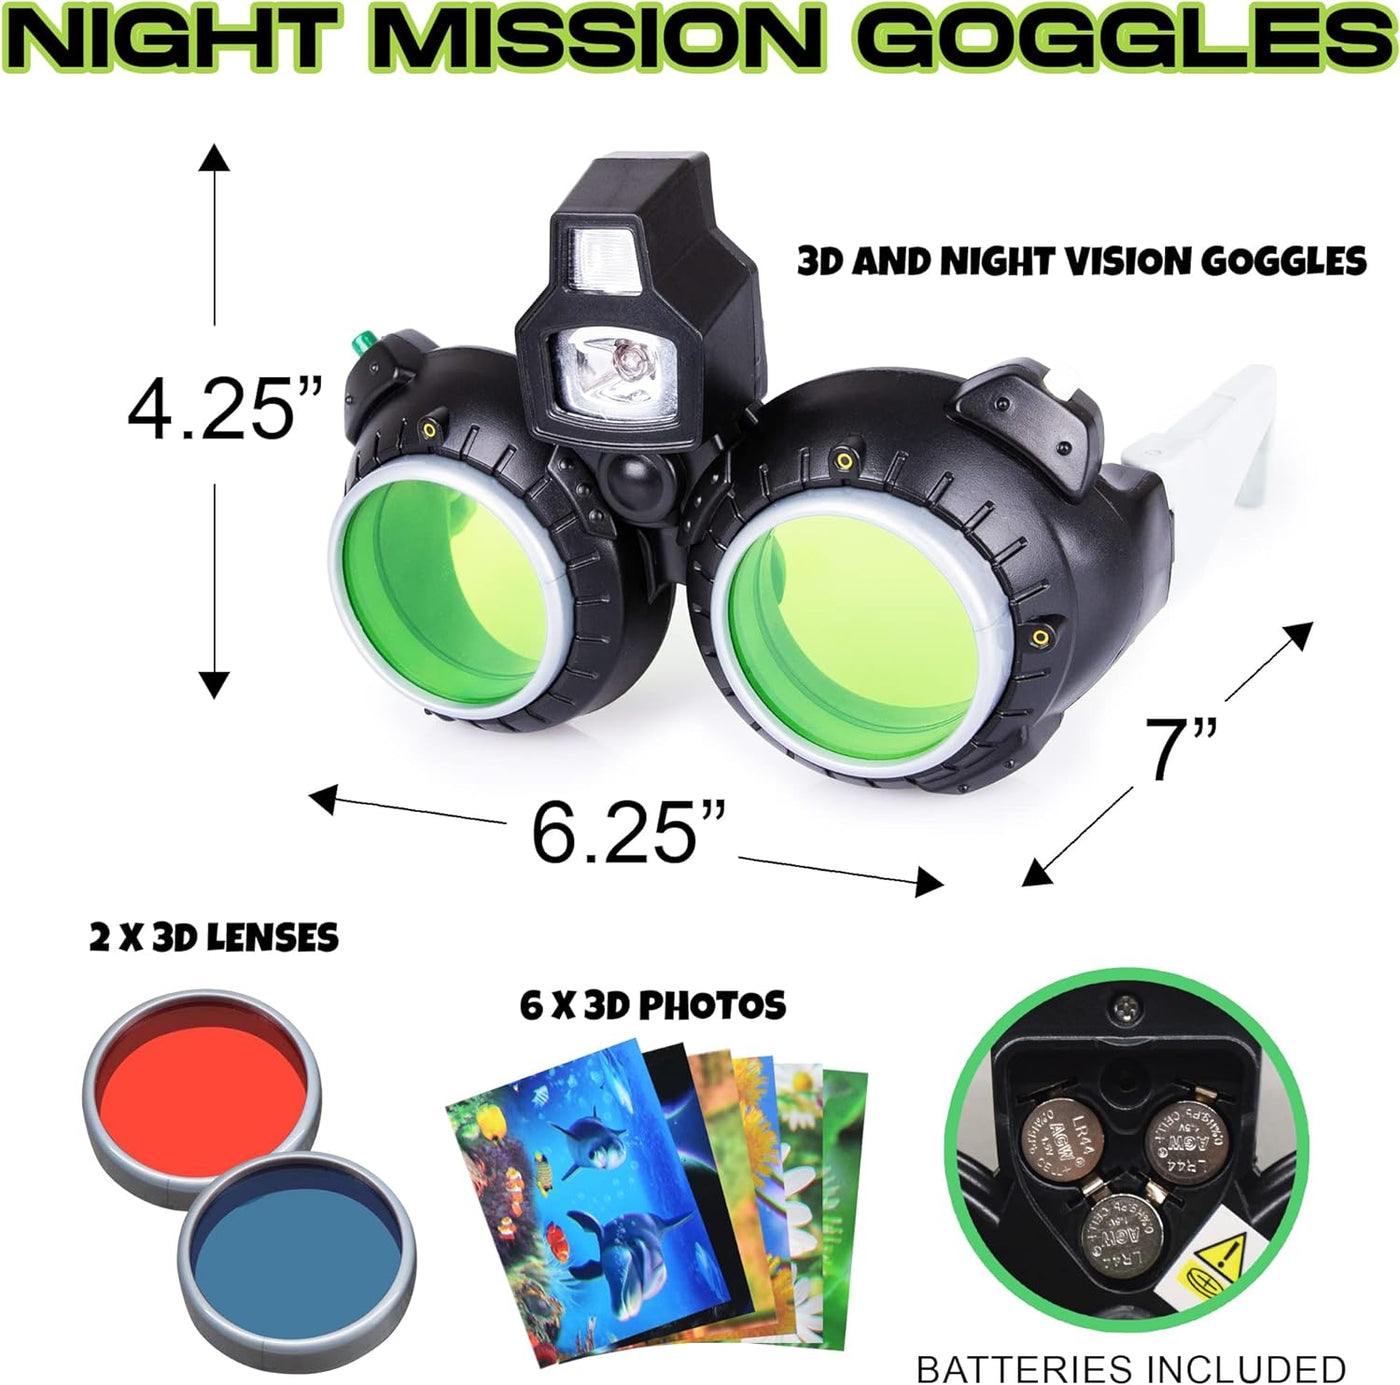 Night Vision Glasses for Kids, Spy Gear Kids Spy Glasses with LED Light Beam, Kids’ Night Mission Glasses for Secret Agent Role Play, Bonus: 6 3D Photo Cards & Red/Blue Lenses for Immersive Viewing